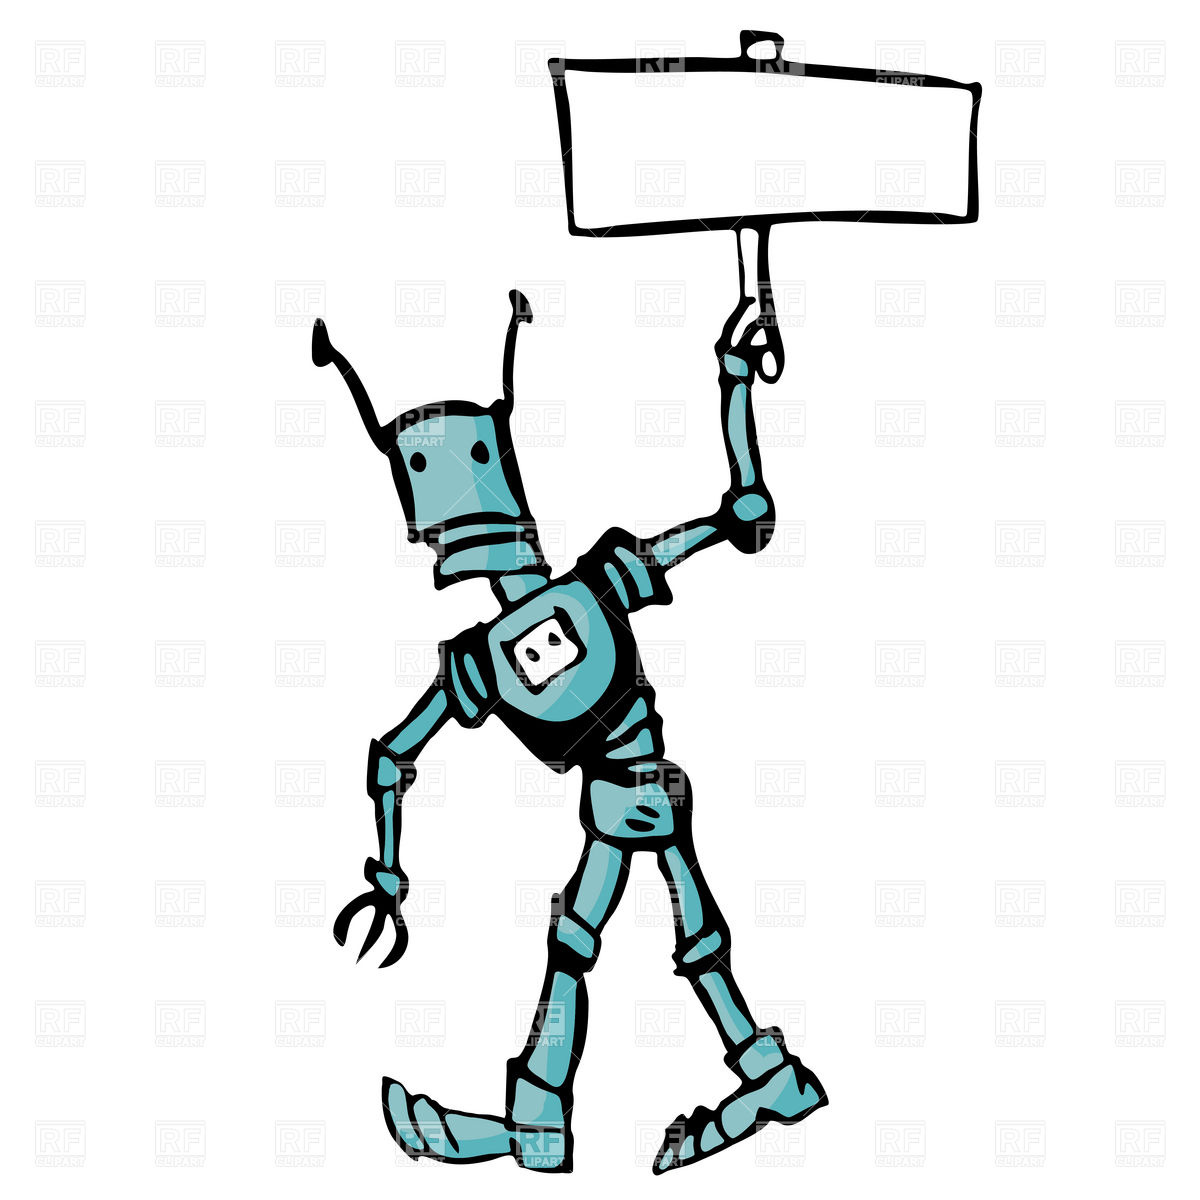 Cartoon Robot With Poster In Hand 16280 Objects Download Royalty